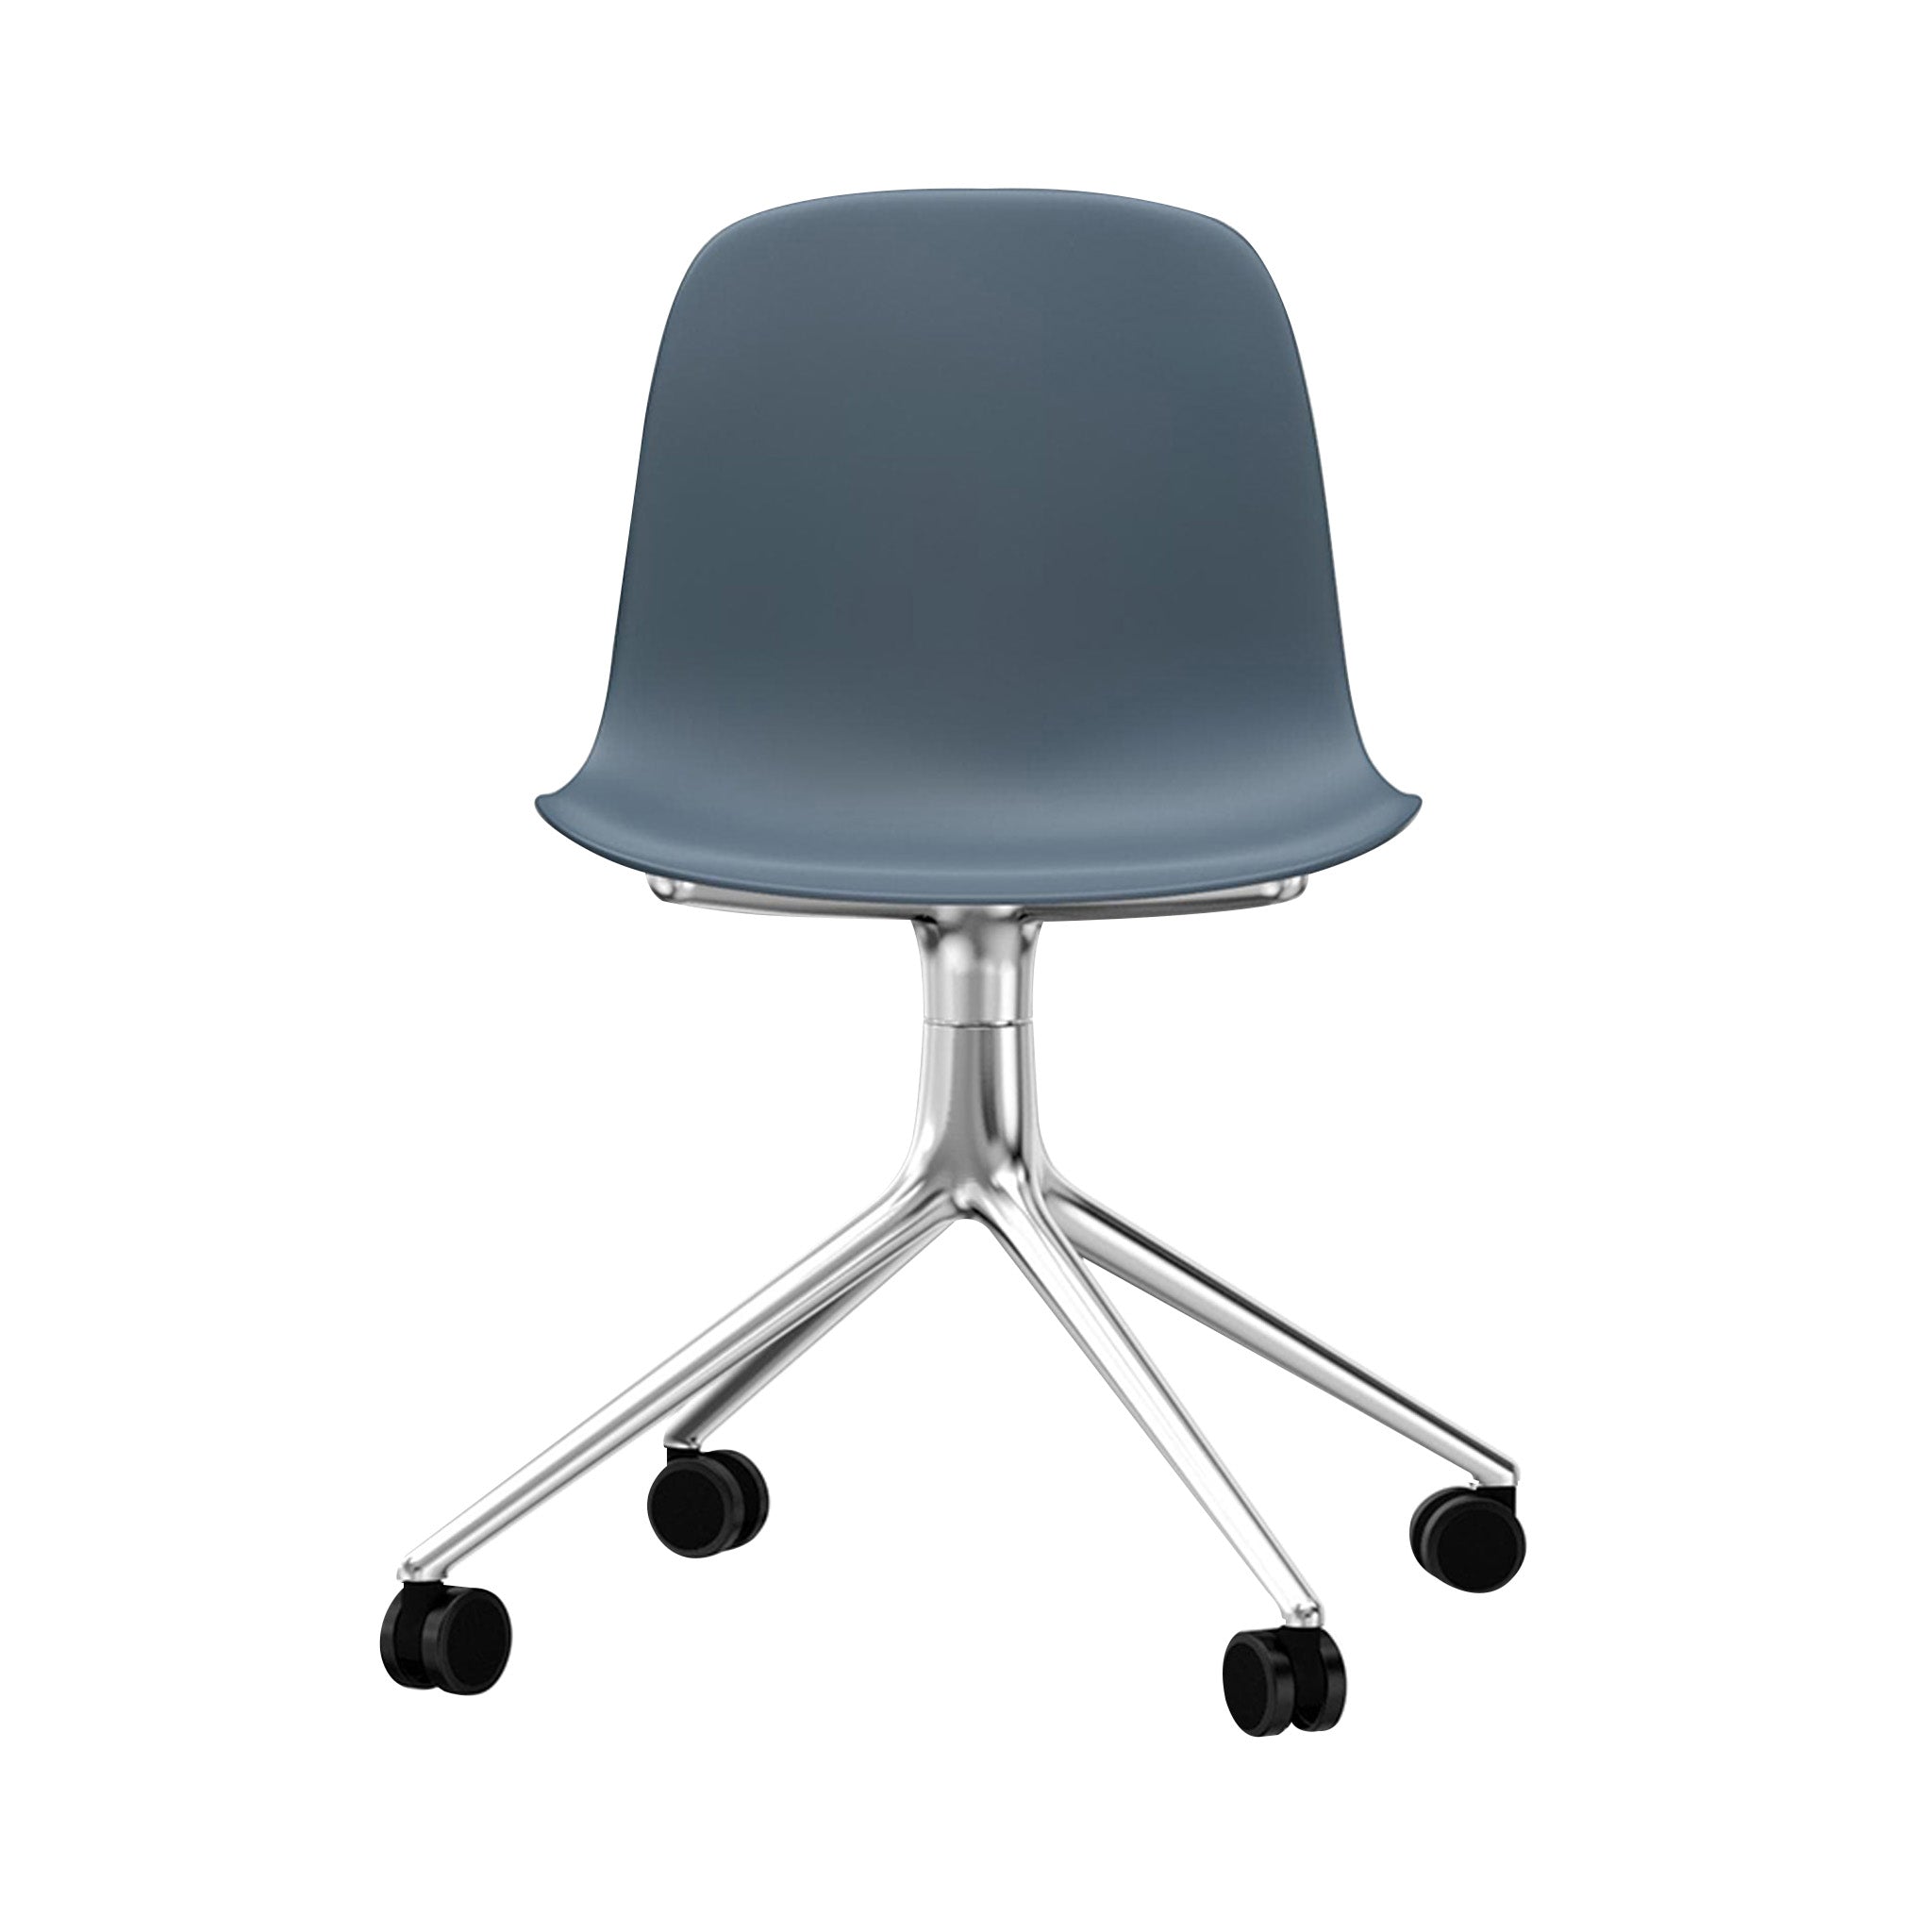 Form Chair: Swivel + Blue + Aluminum + With Casters